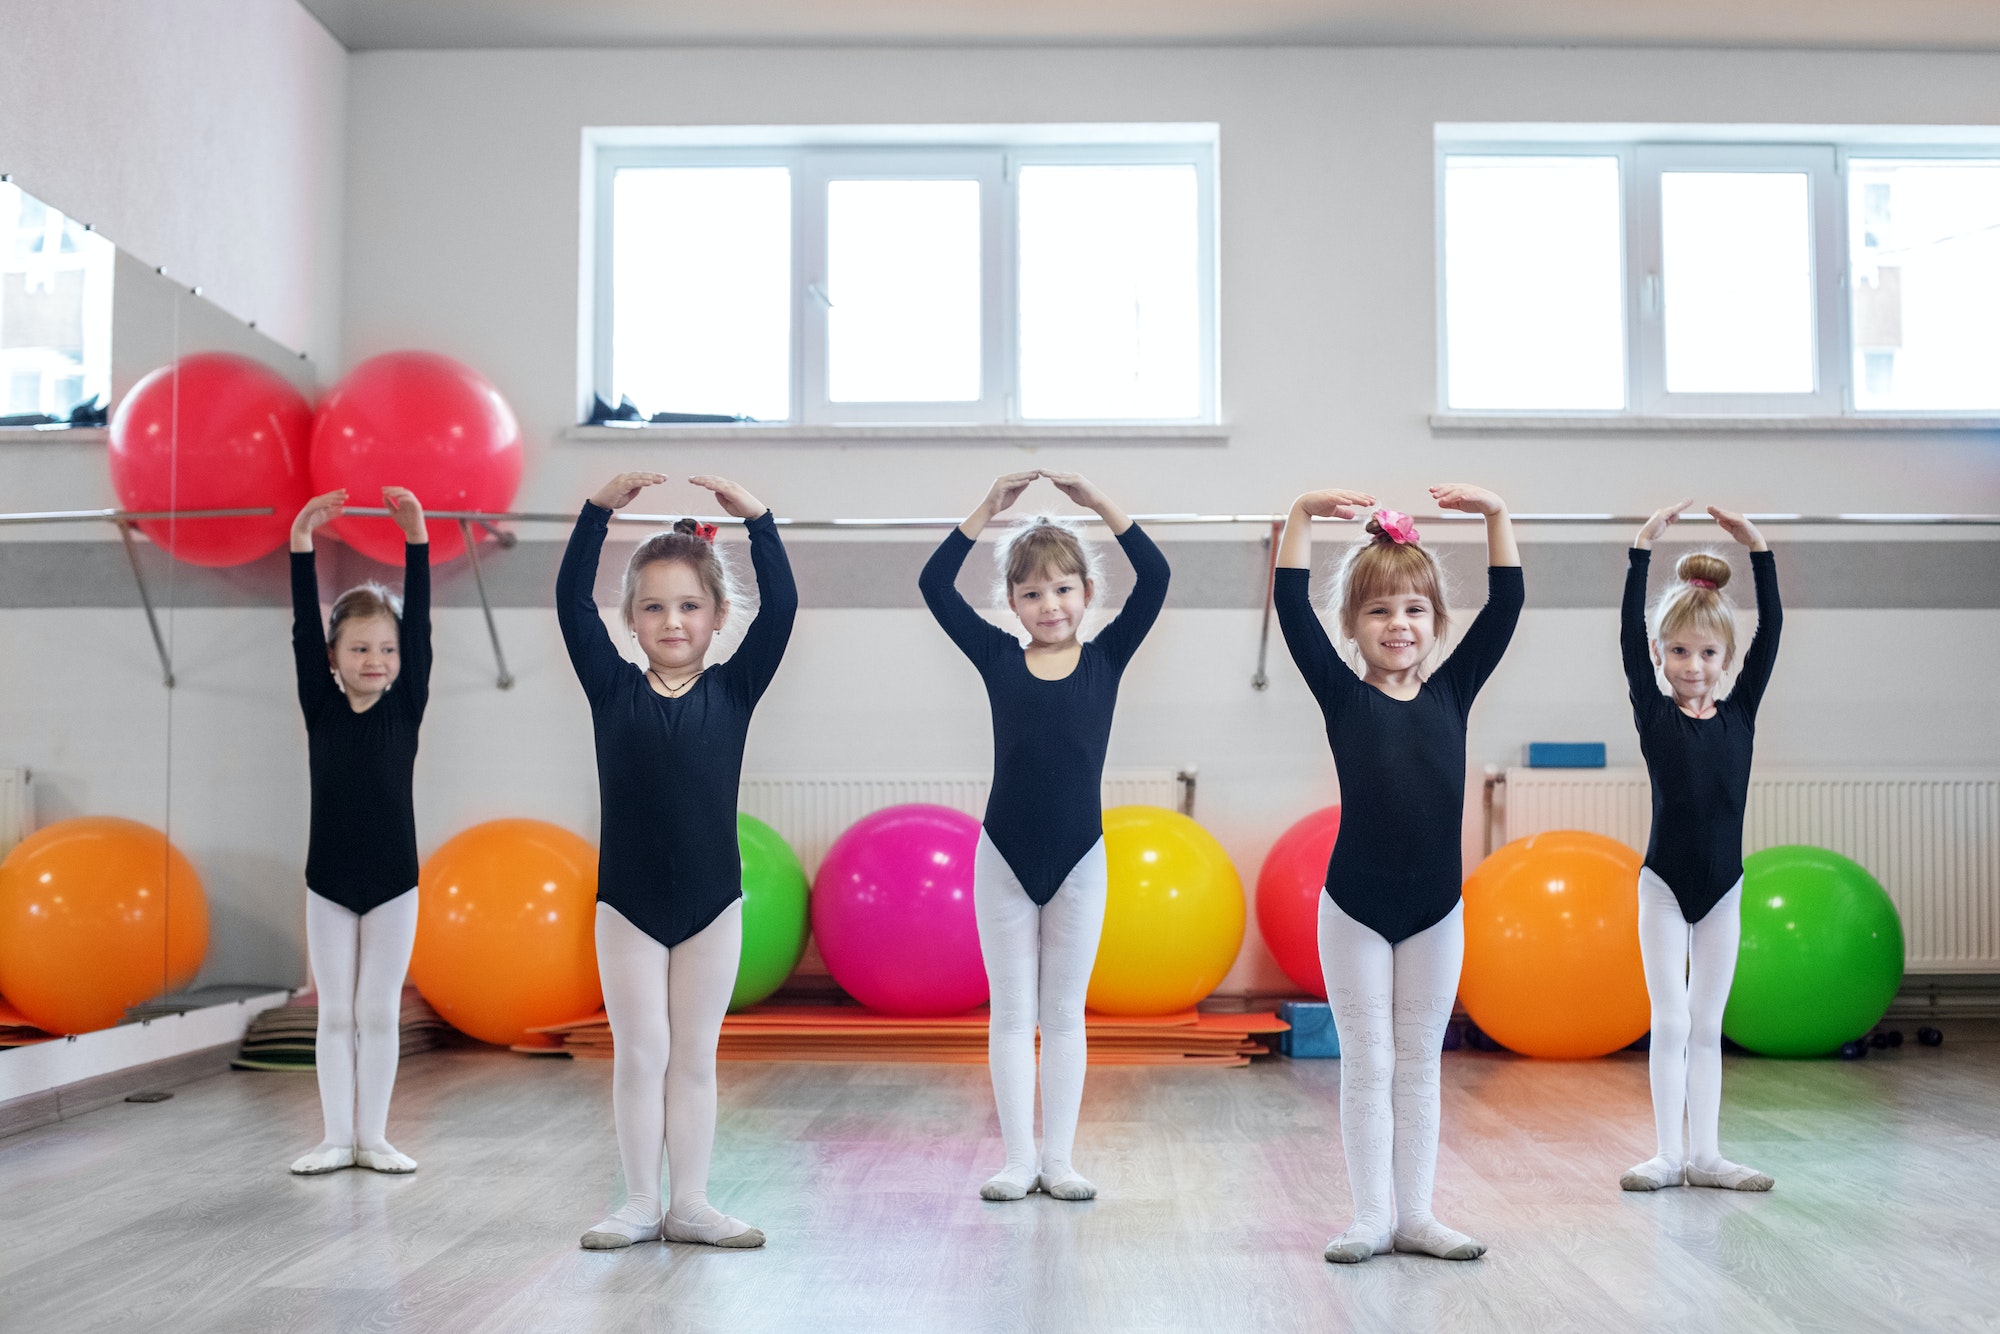 Little kids dance in dance class. The concept of sport, education, childhood, hobbies and dance.